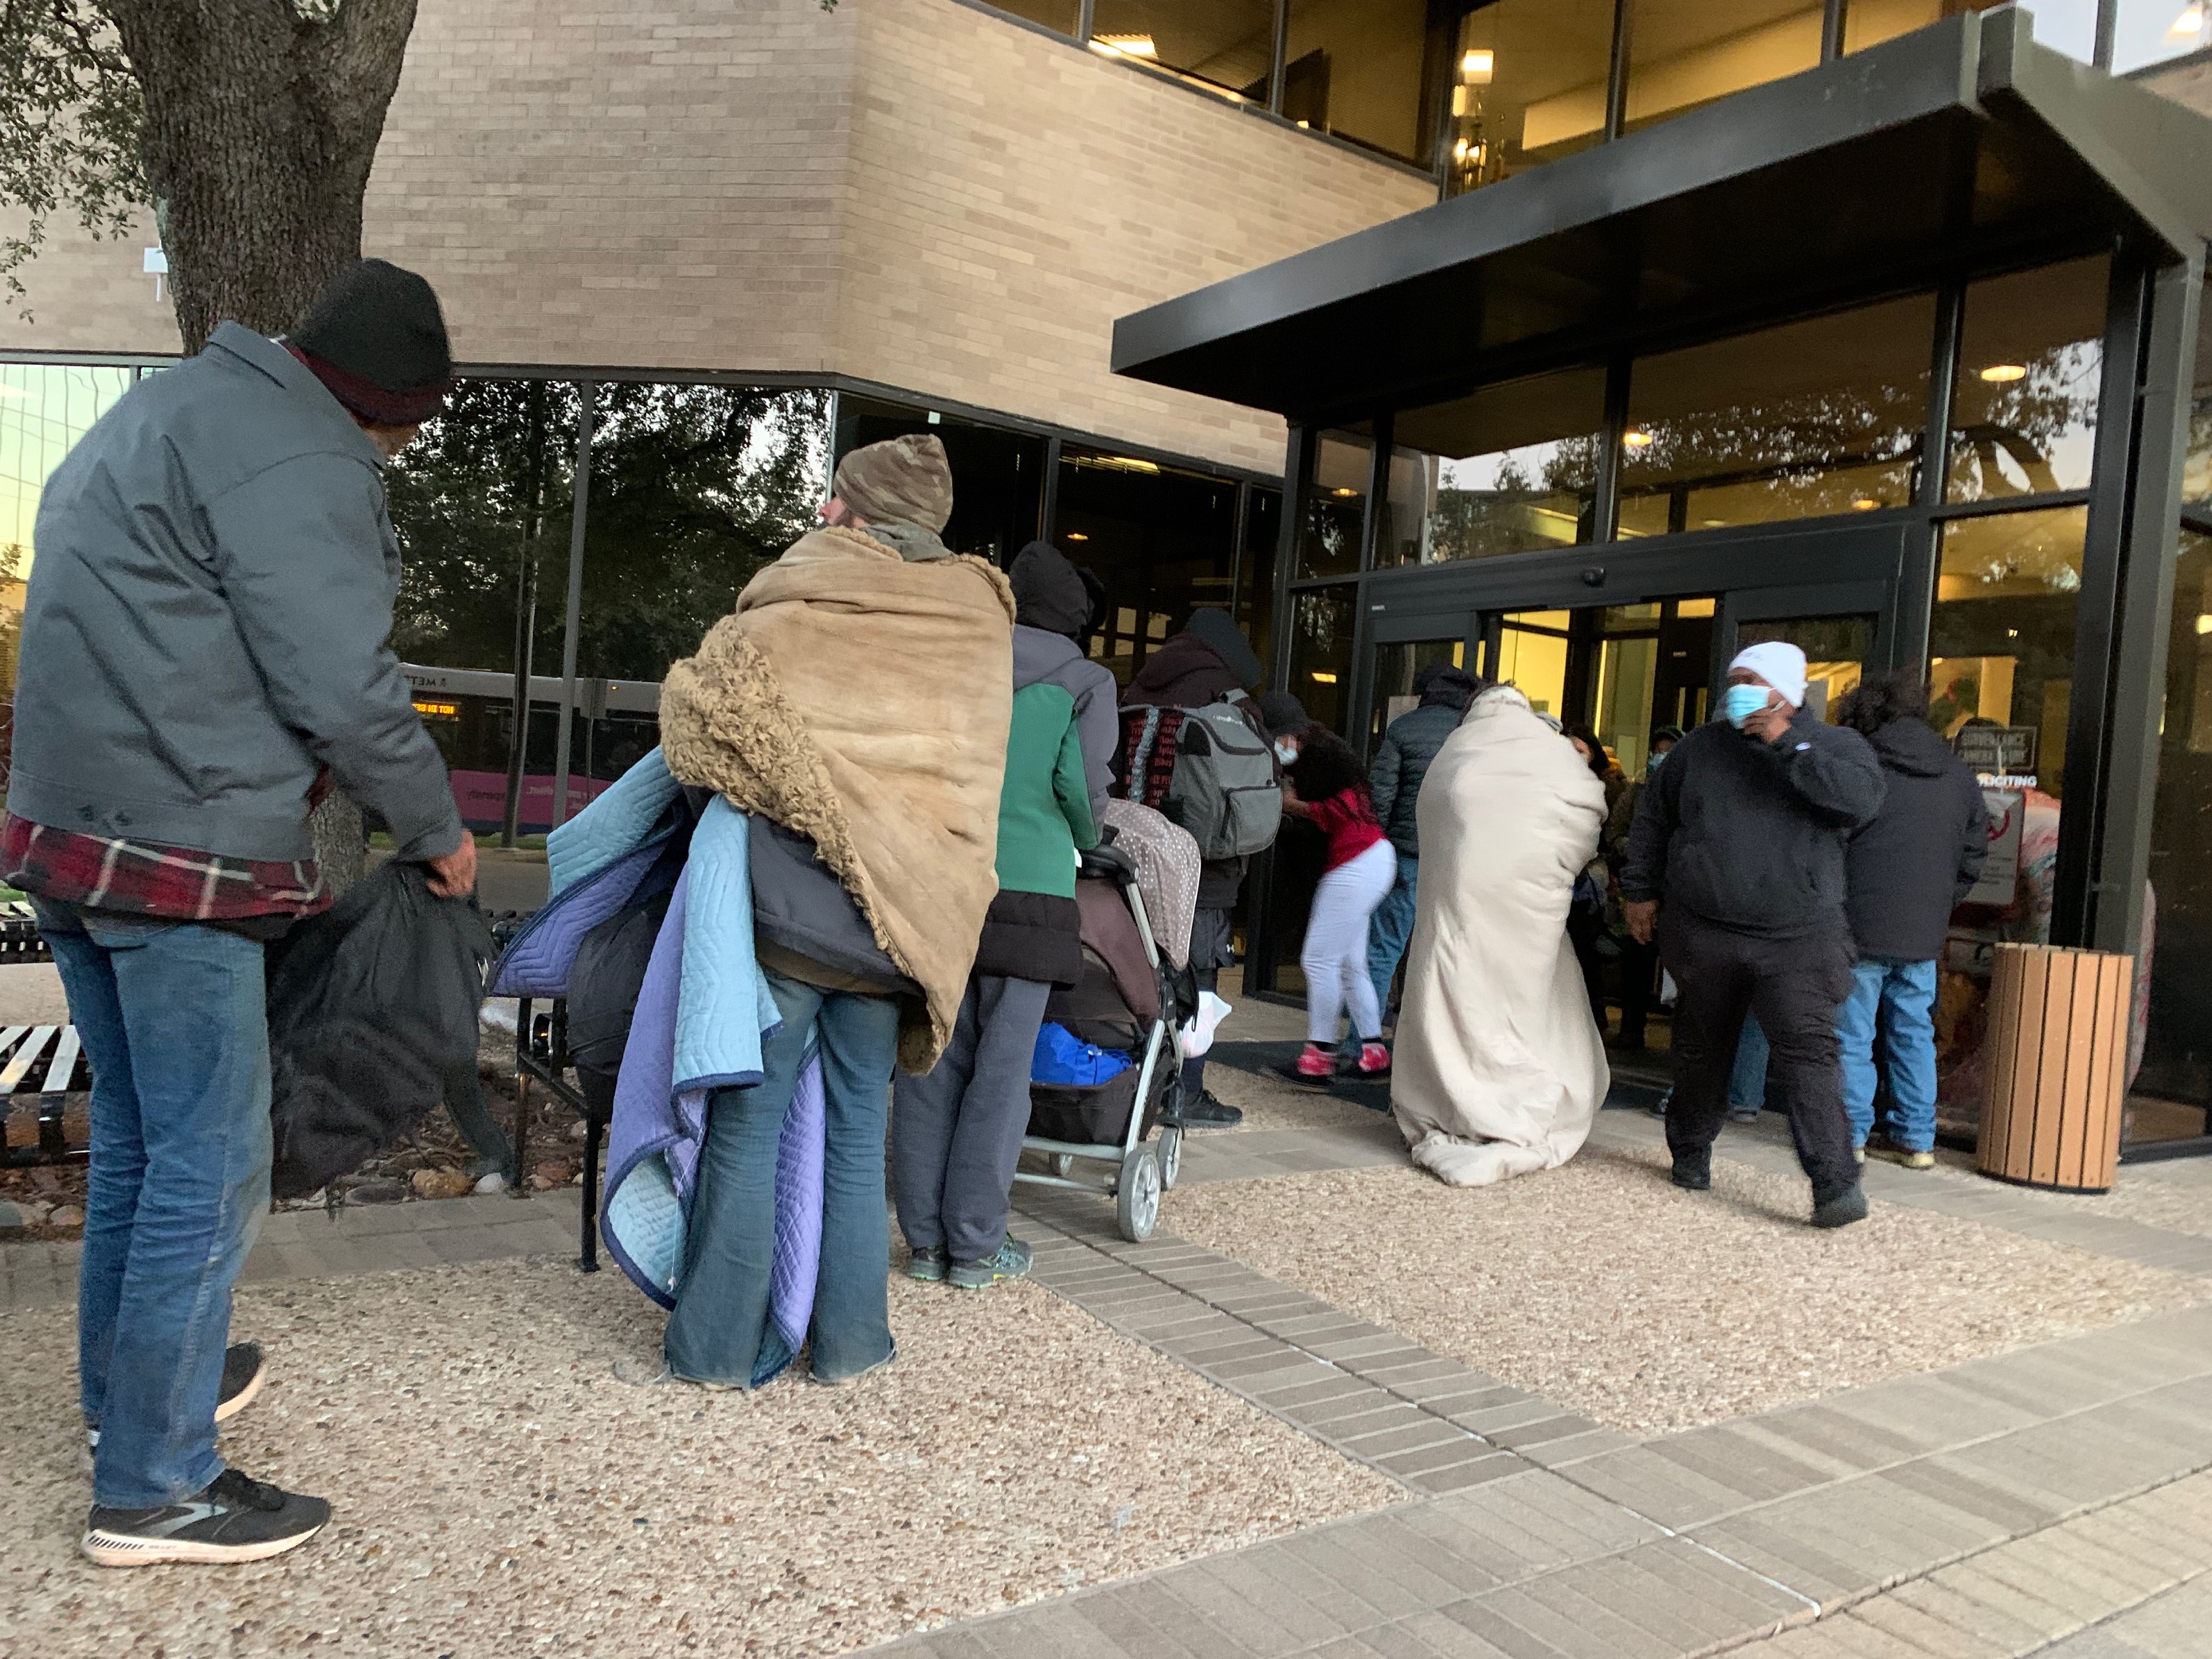 A line of people wait to register for transportation to a Cold Weather Shelter.